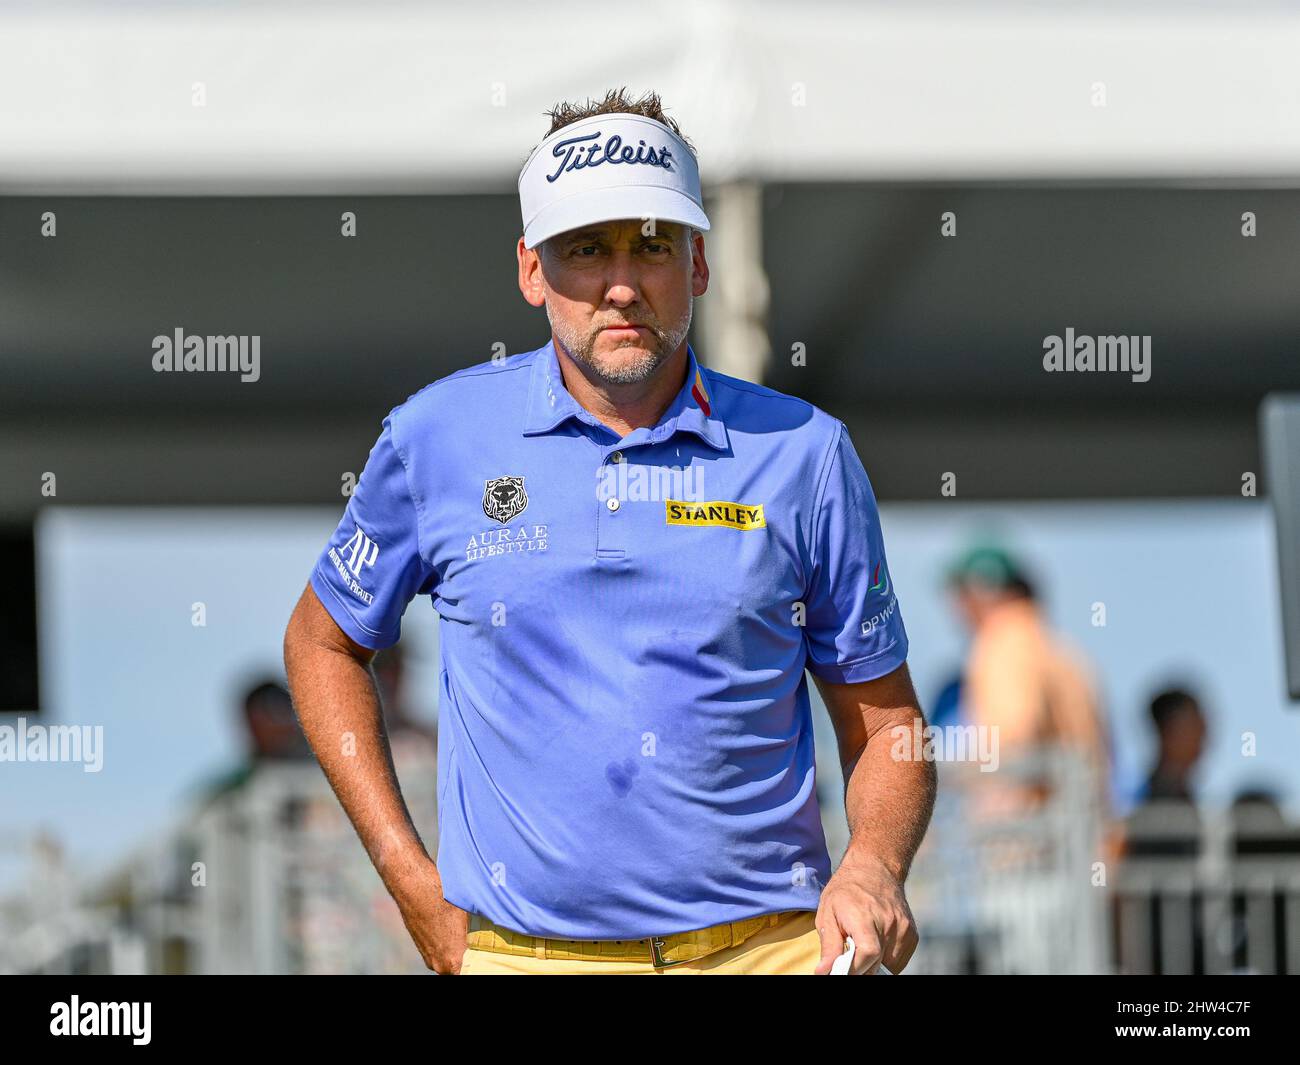 Orlando, FL, USA. 3rd Mar, 2022. Ian Poulter of England walks to the 9th tee of the United States during first round golf action of the Arnold Palmer Invitational presented by Mastercard held at Arnold Palmer's Bay Hill Club & Lodge in Orlando, Fl. Romeo T Guzman/CSM/Alamy Live News Stock Photo